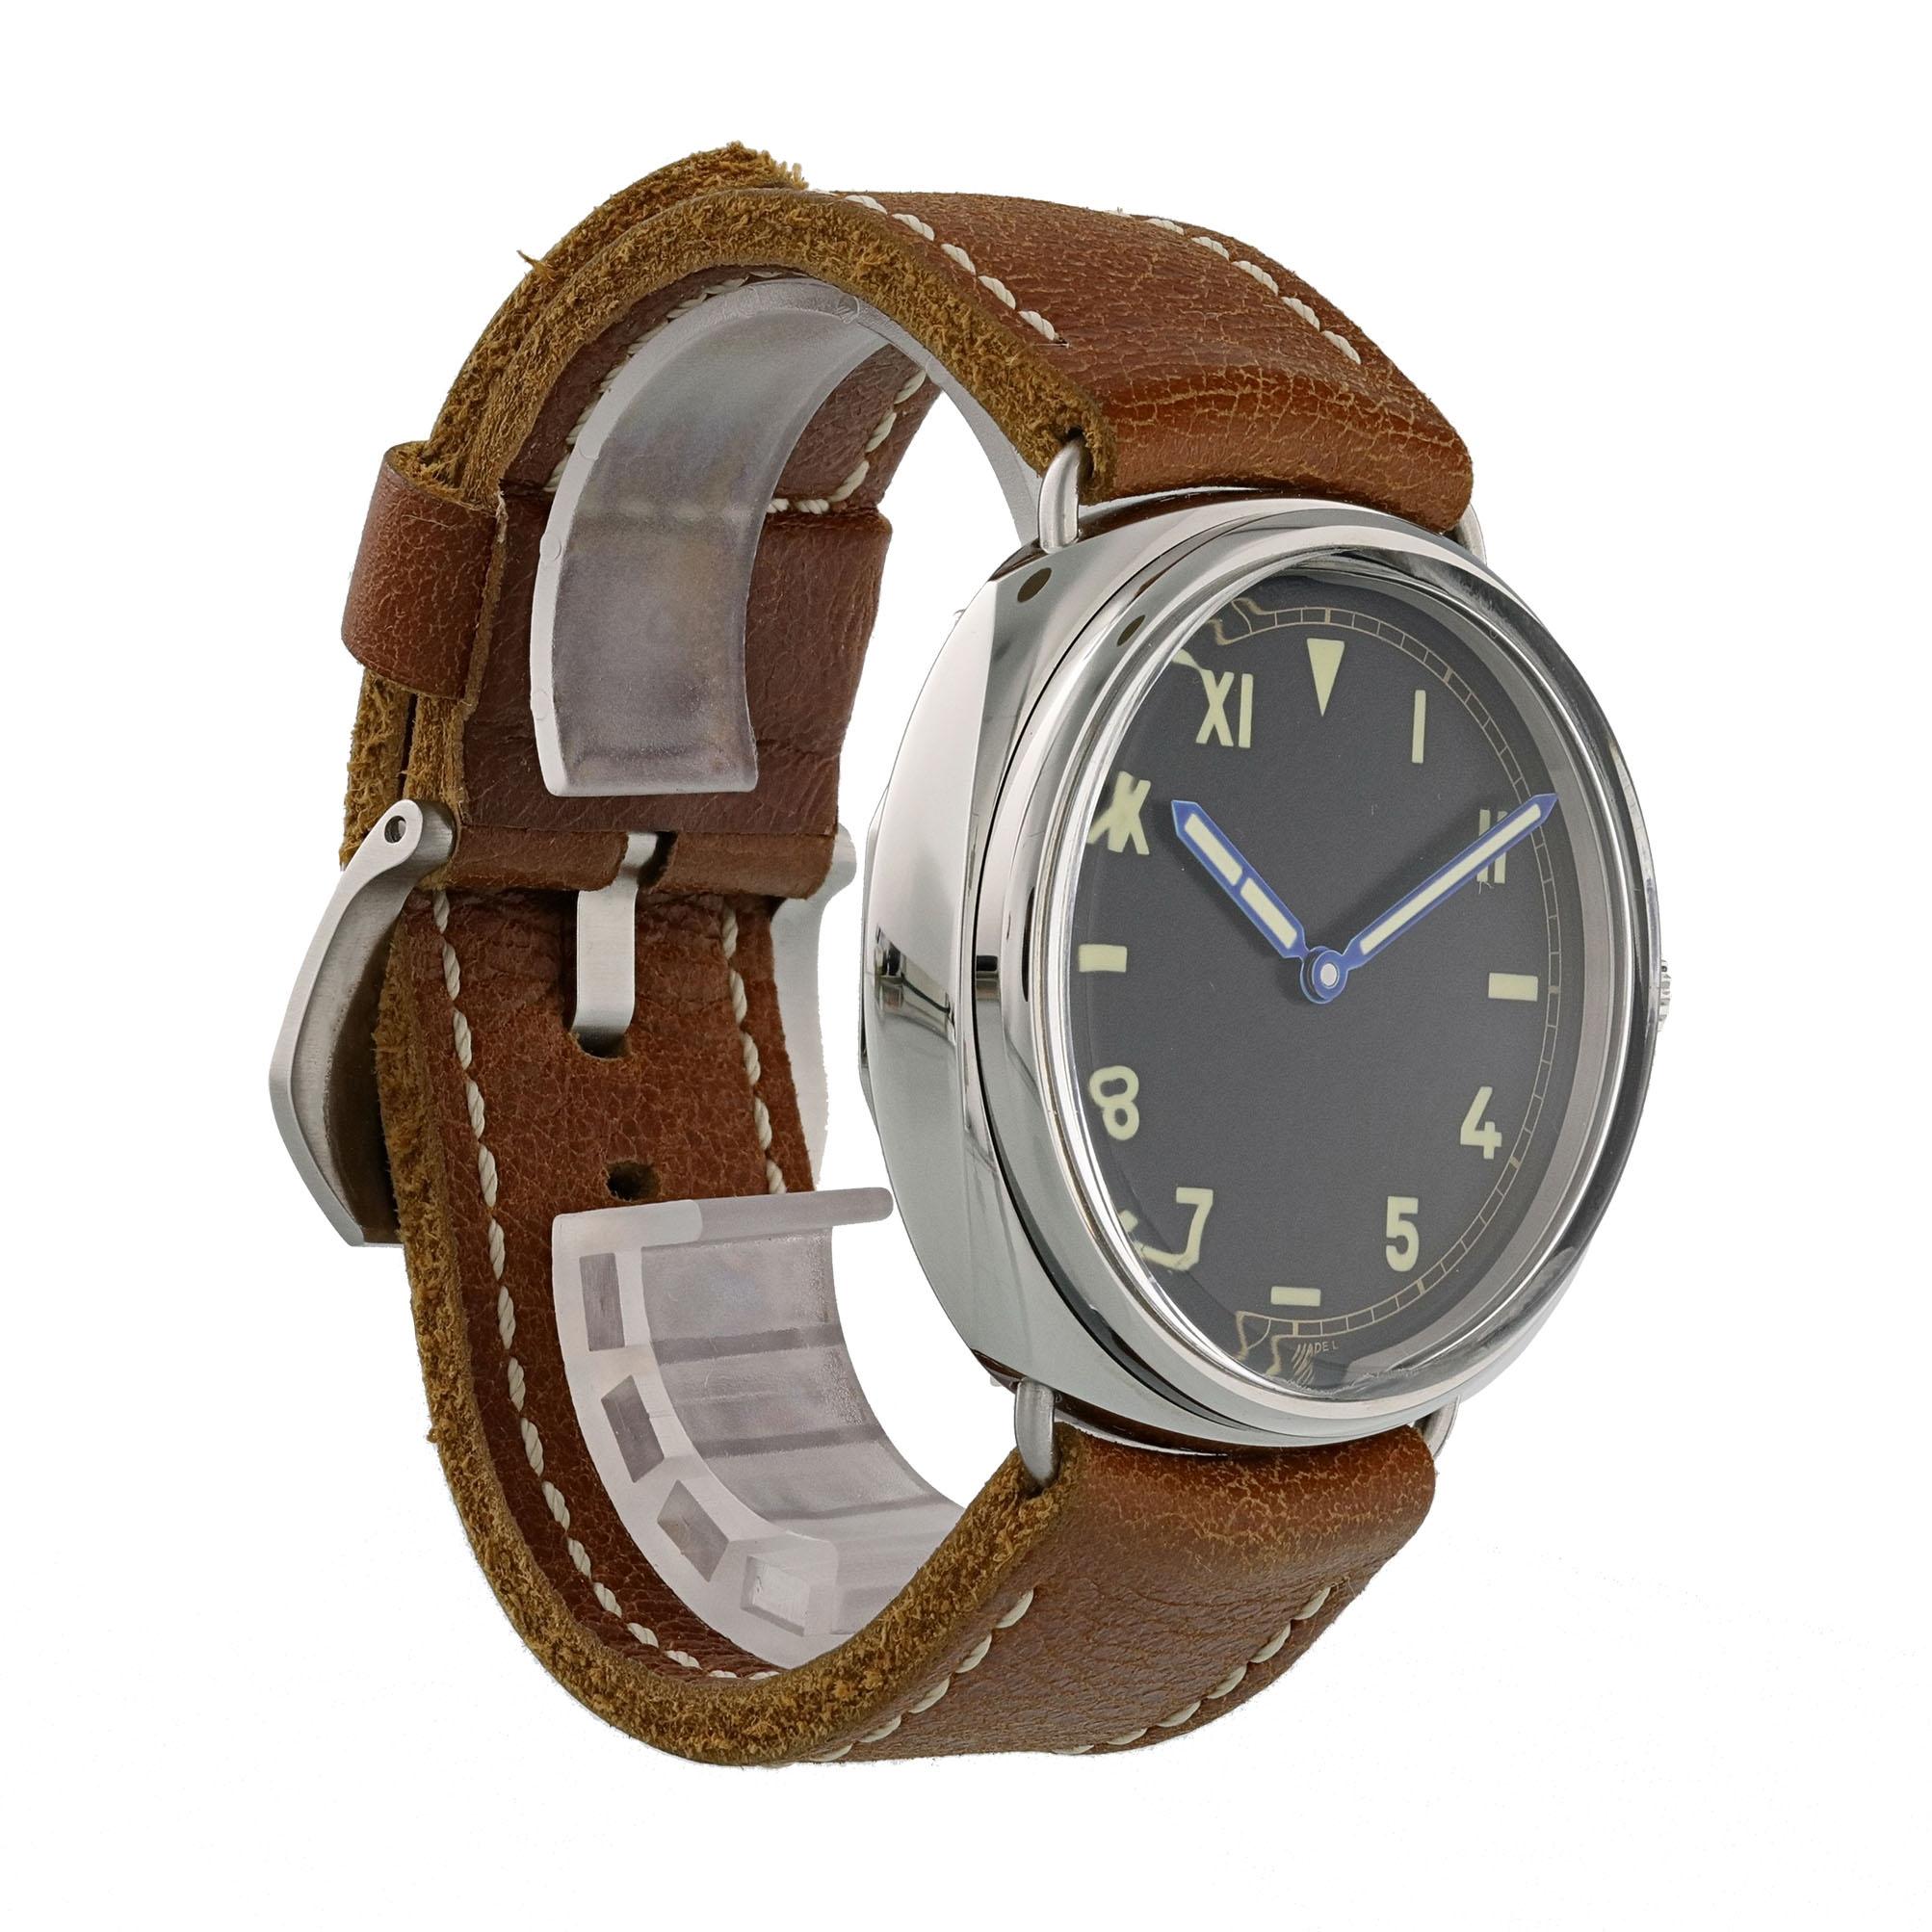 Panerai Radiomir 1936 California Dial PAM00349 Men's Watch.
47mm Stainless Steel case. 
Stainless Steel smooth bezel. 
Black California dial. Minute markers on the outer dial. 
Date display at the 3 o'clock position. 
Leather Strap with Buckle.